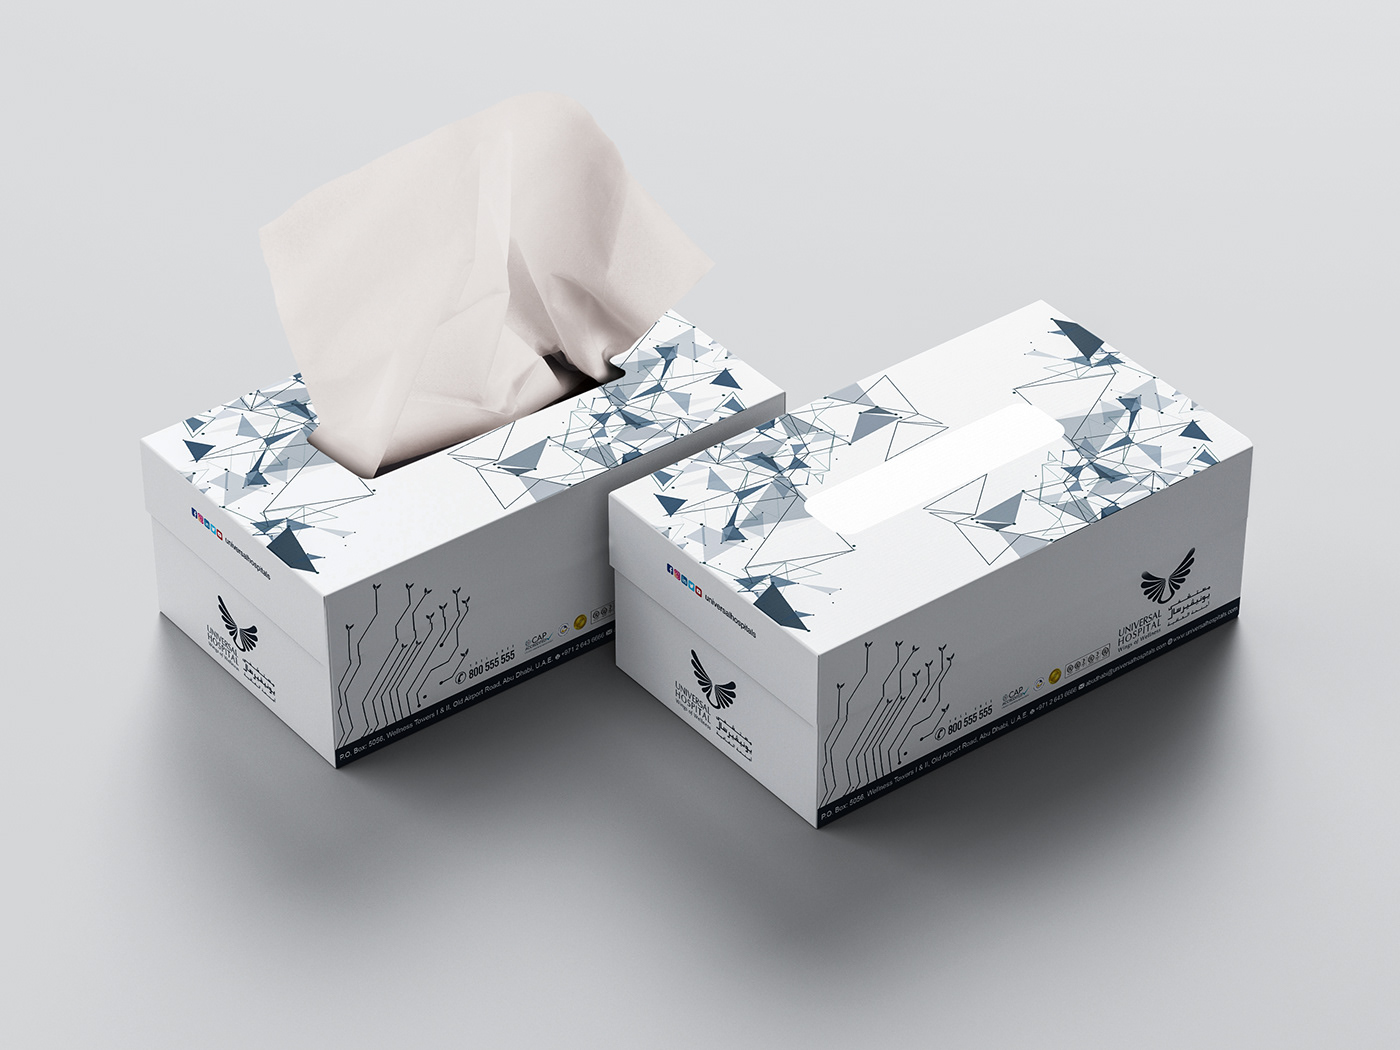 TISSUE DESIGN PACKING PRODUCT ELEGANT PACKAGING DESIGN IDENTITY CORPORATE PATTERN SMOOTH GREY tissue tissuebox productdesign Packaging